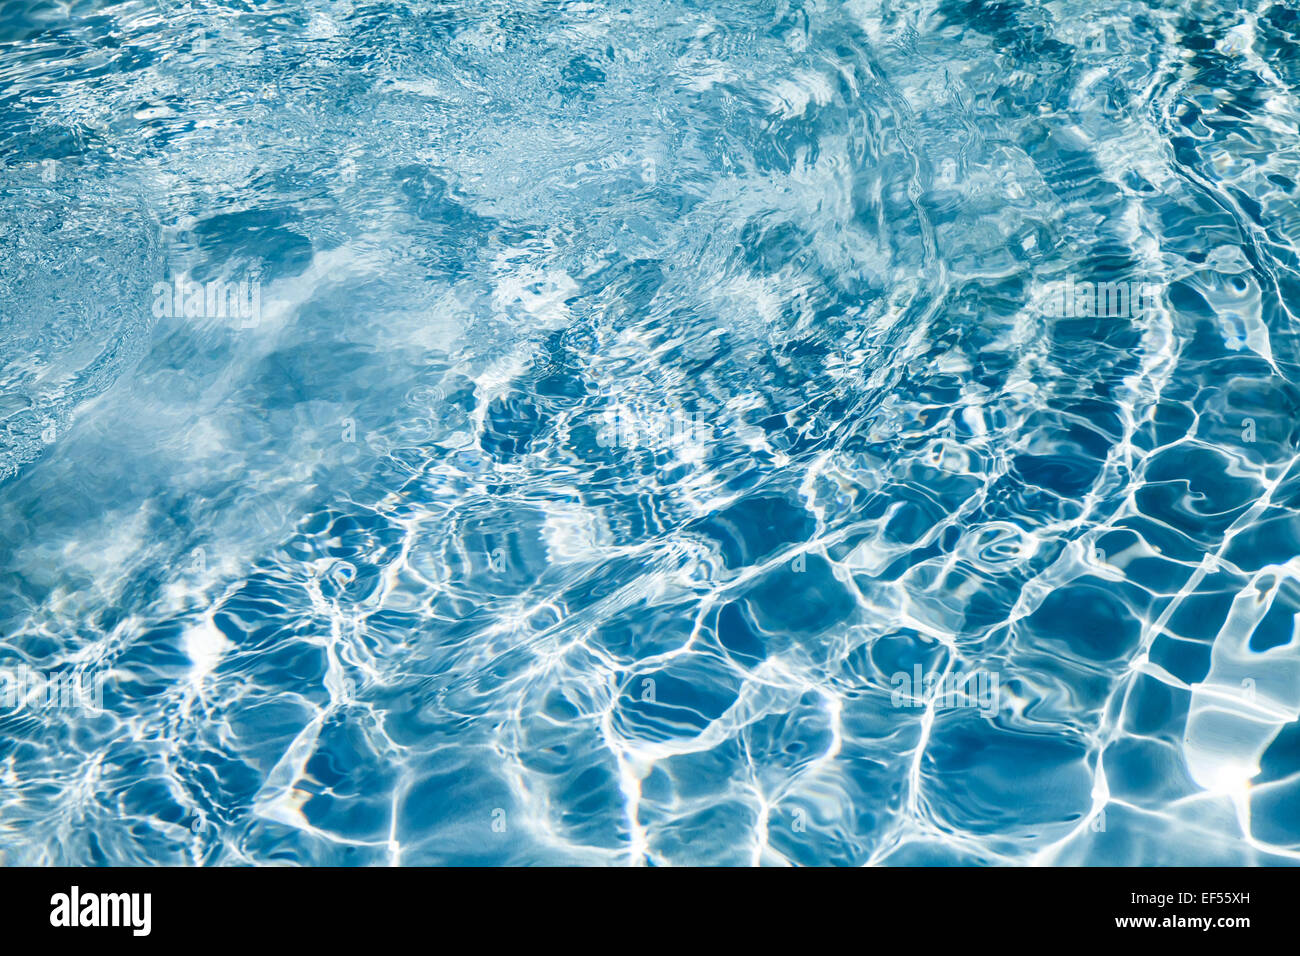 Bright deep blue pool water background texture Stock Photo